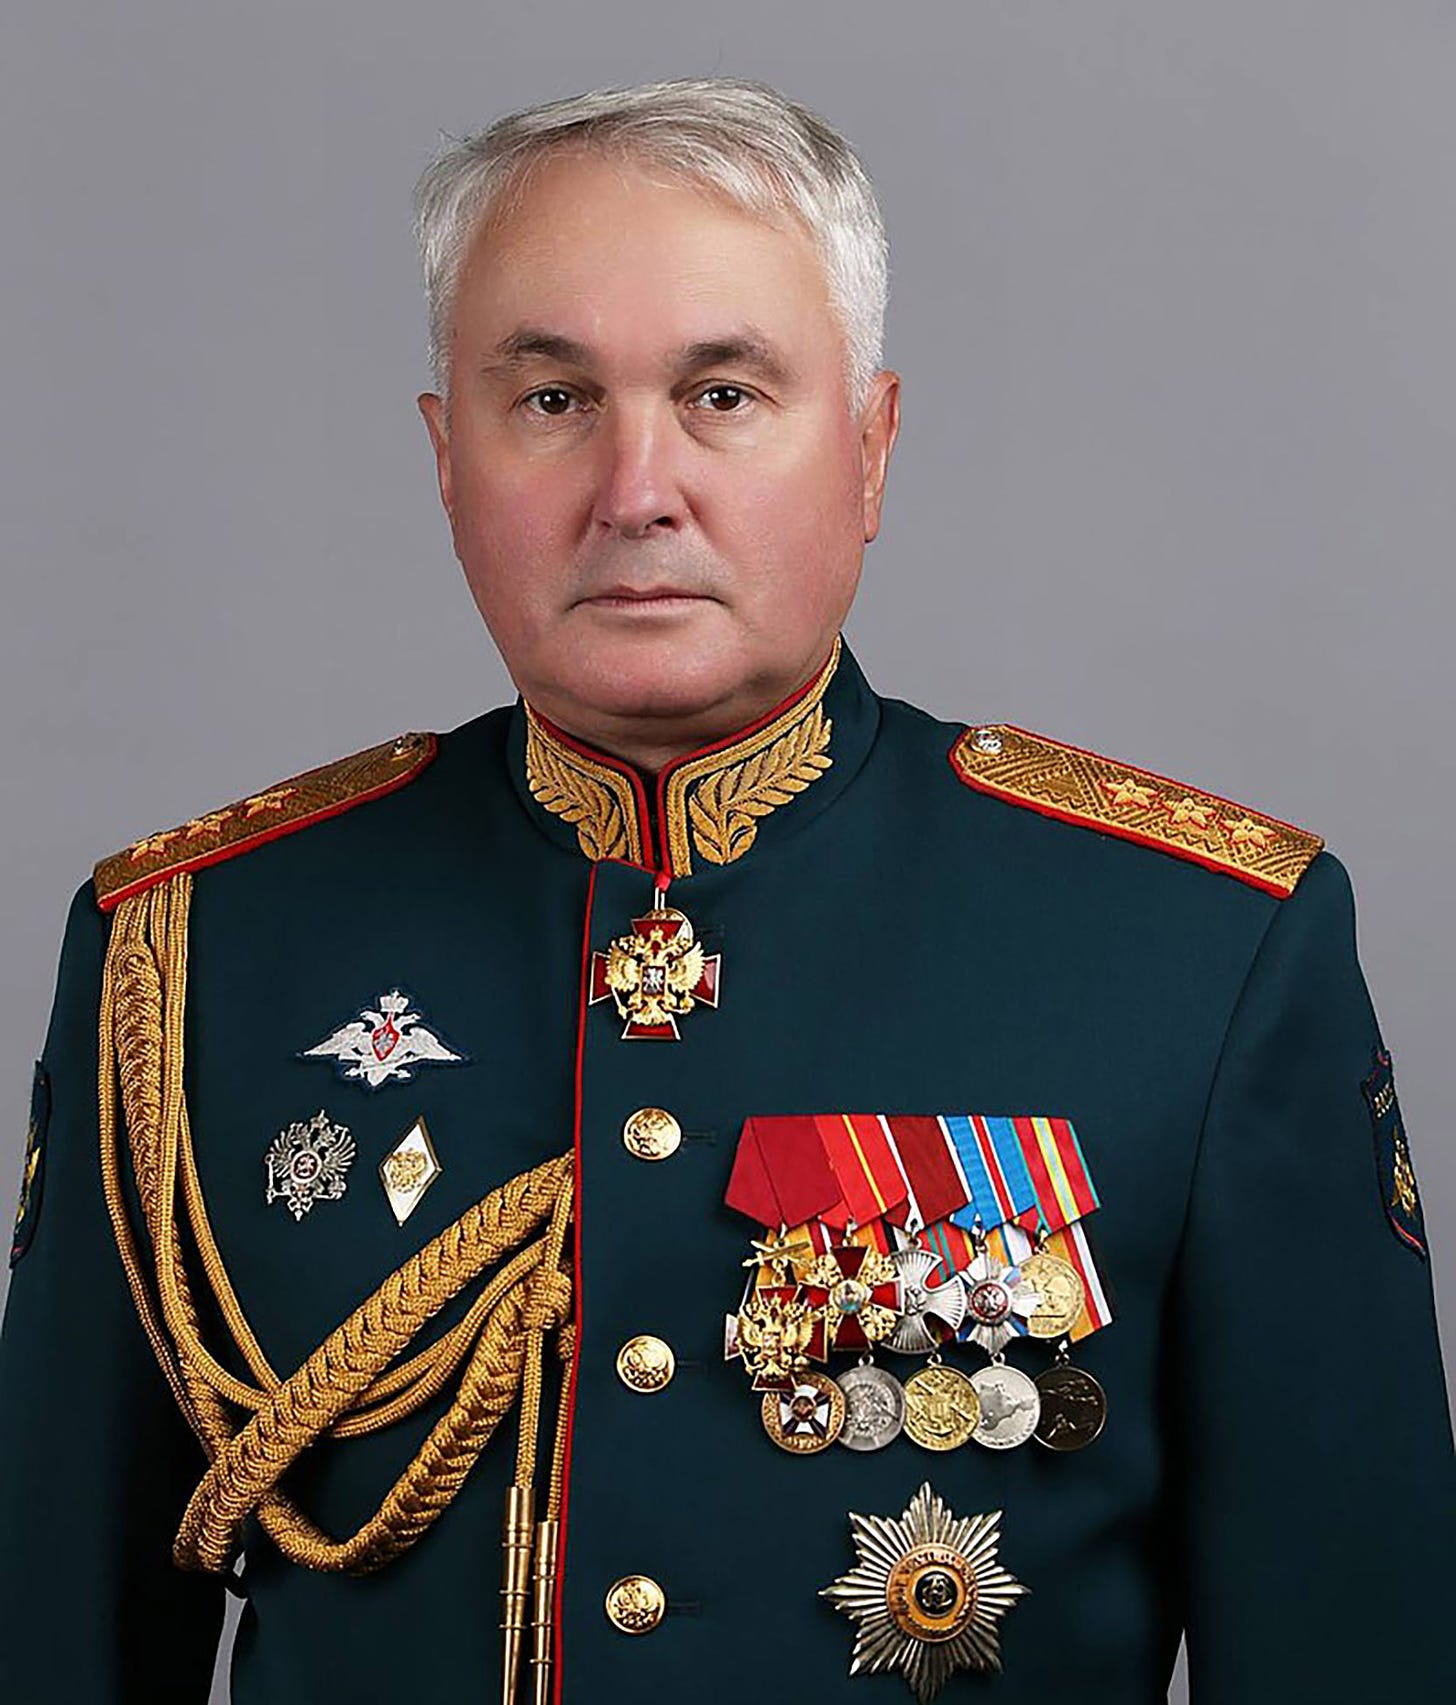 Colonel General Andrei Kartapolov mentioned the Suwalki gap in an ominous warning